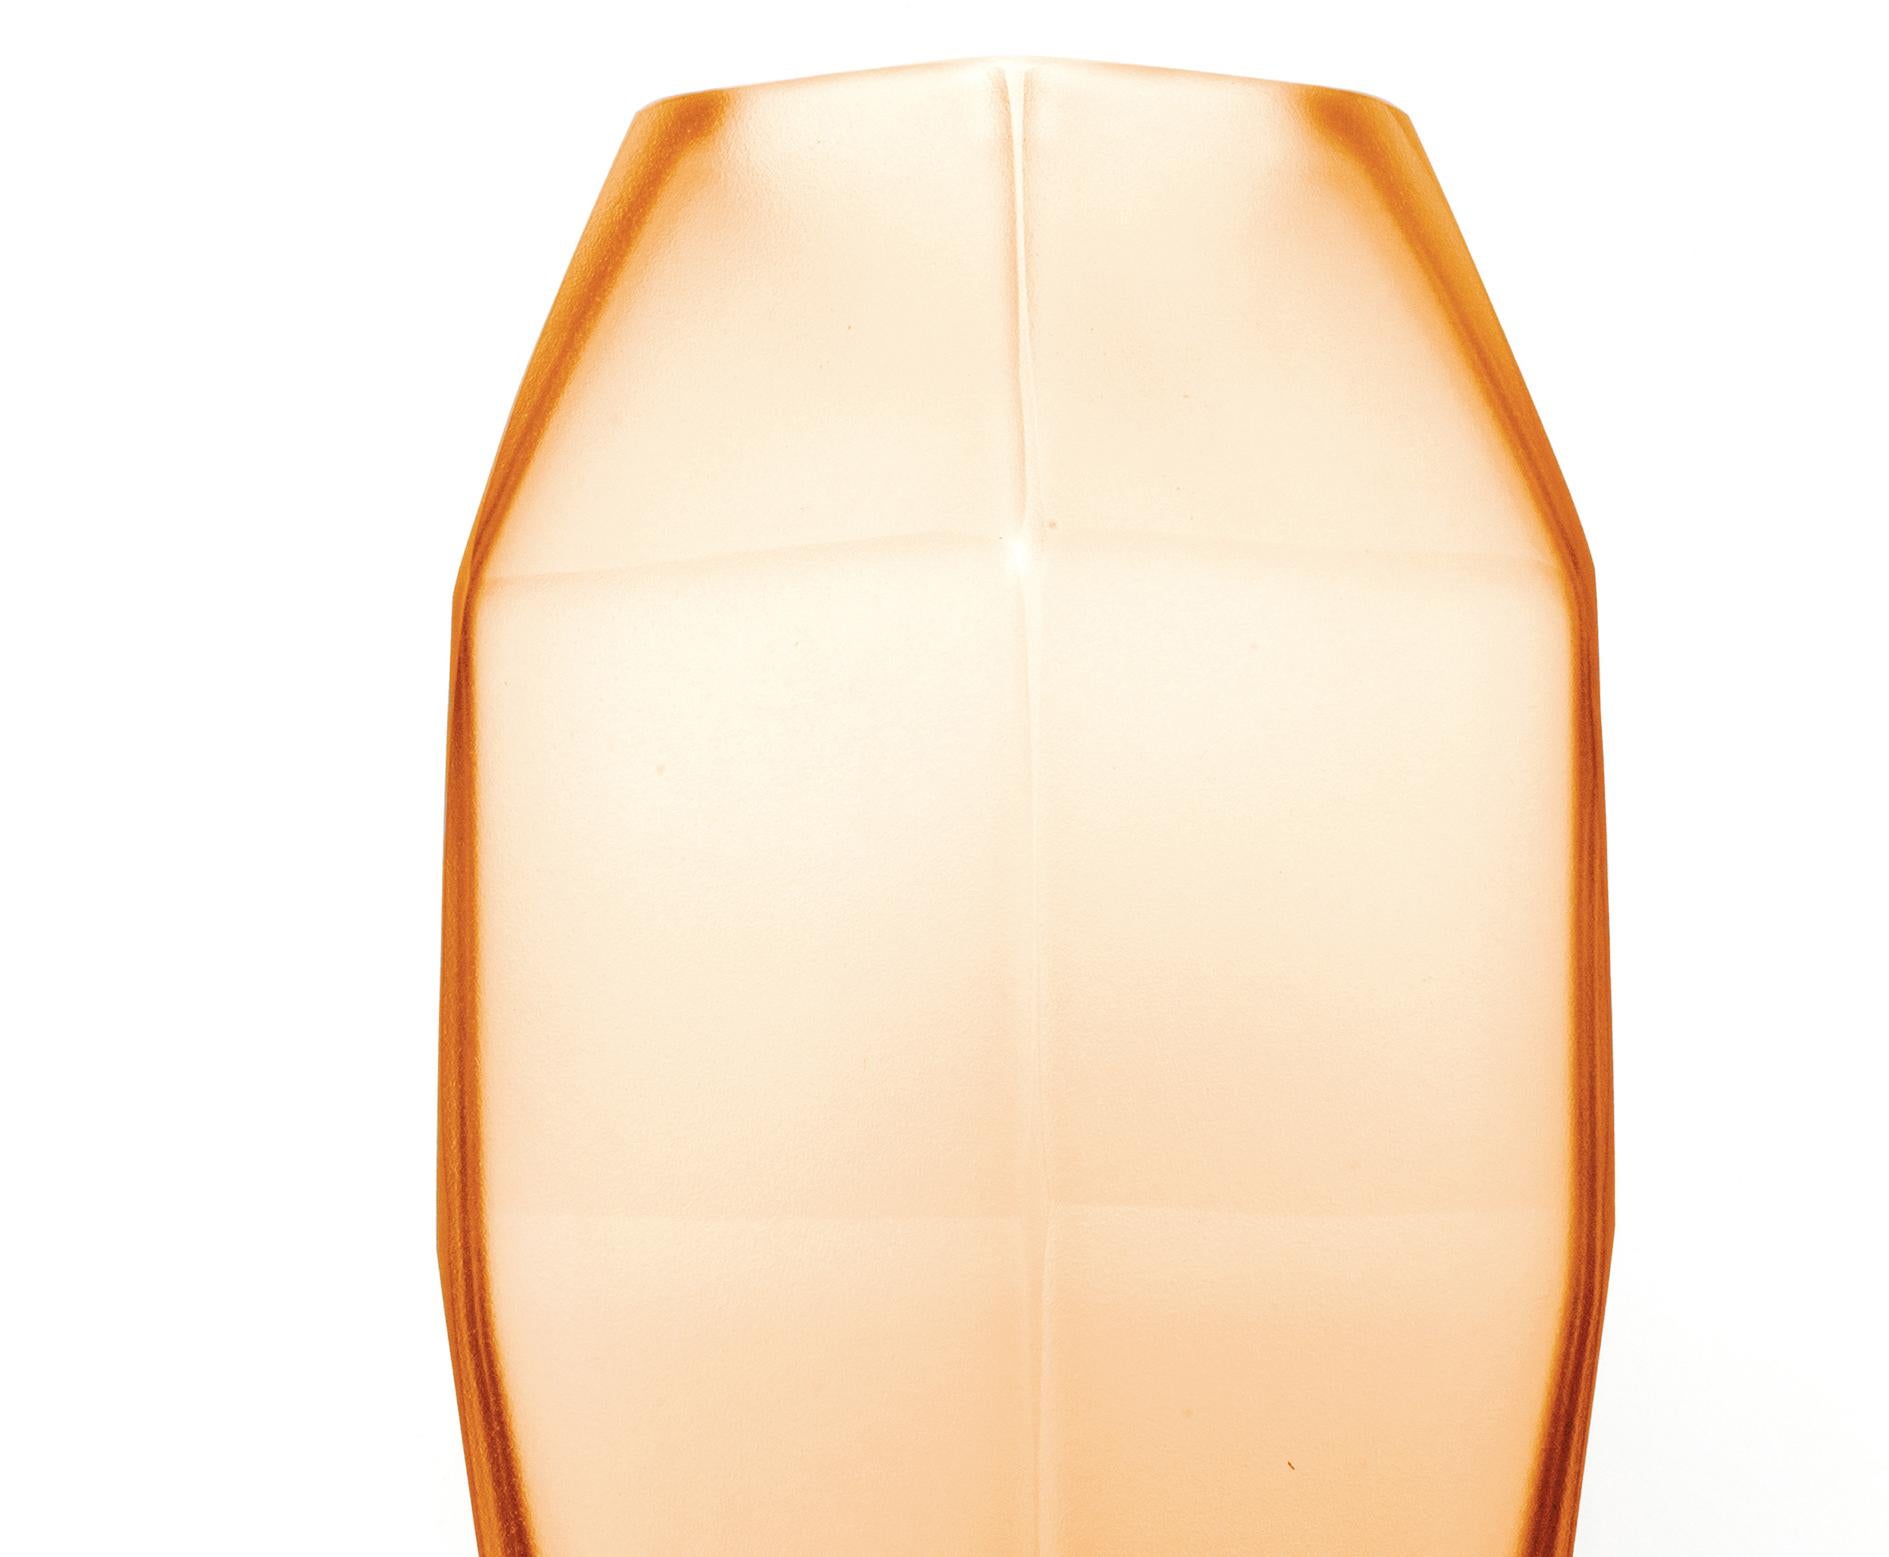 21st Century Alessandro Mendini, GEMELLO transparent vase, Murano glass.
Purho continues to search for products with complementary shapes with the pair of Gemello and Gemella vases designed by Alessandro Mendini. Sharing the same design concept,